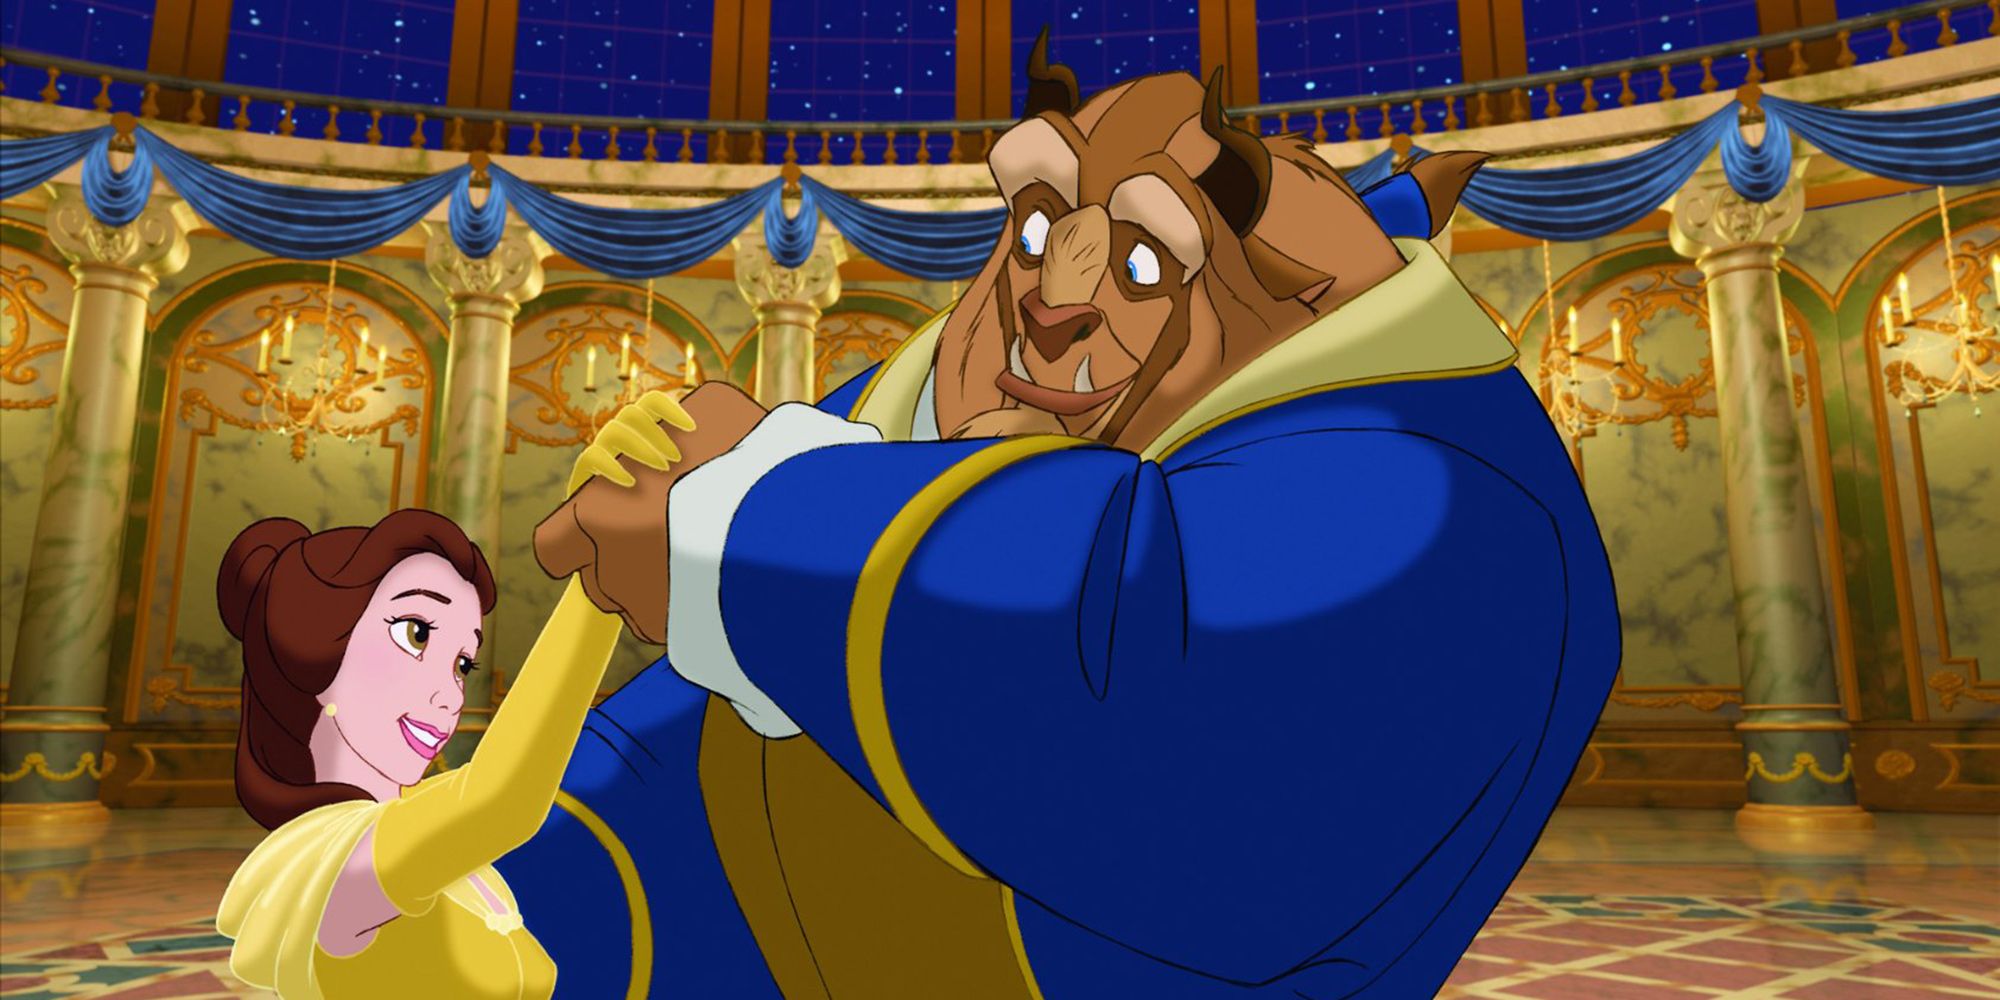 Featured image: Belle and the Beast dancing in Beauty and the Beast